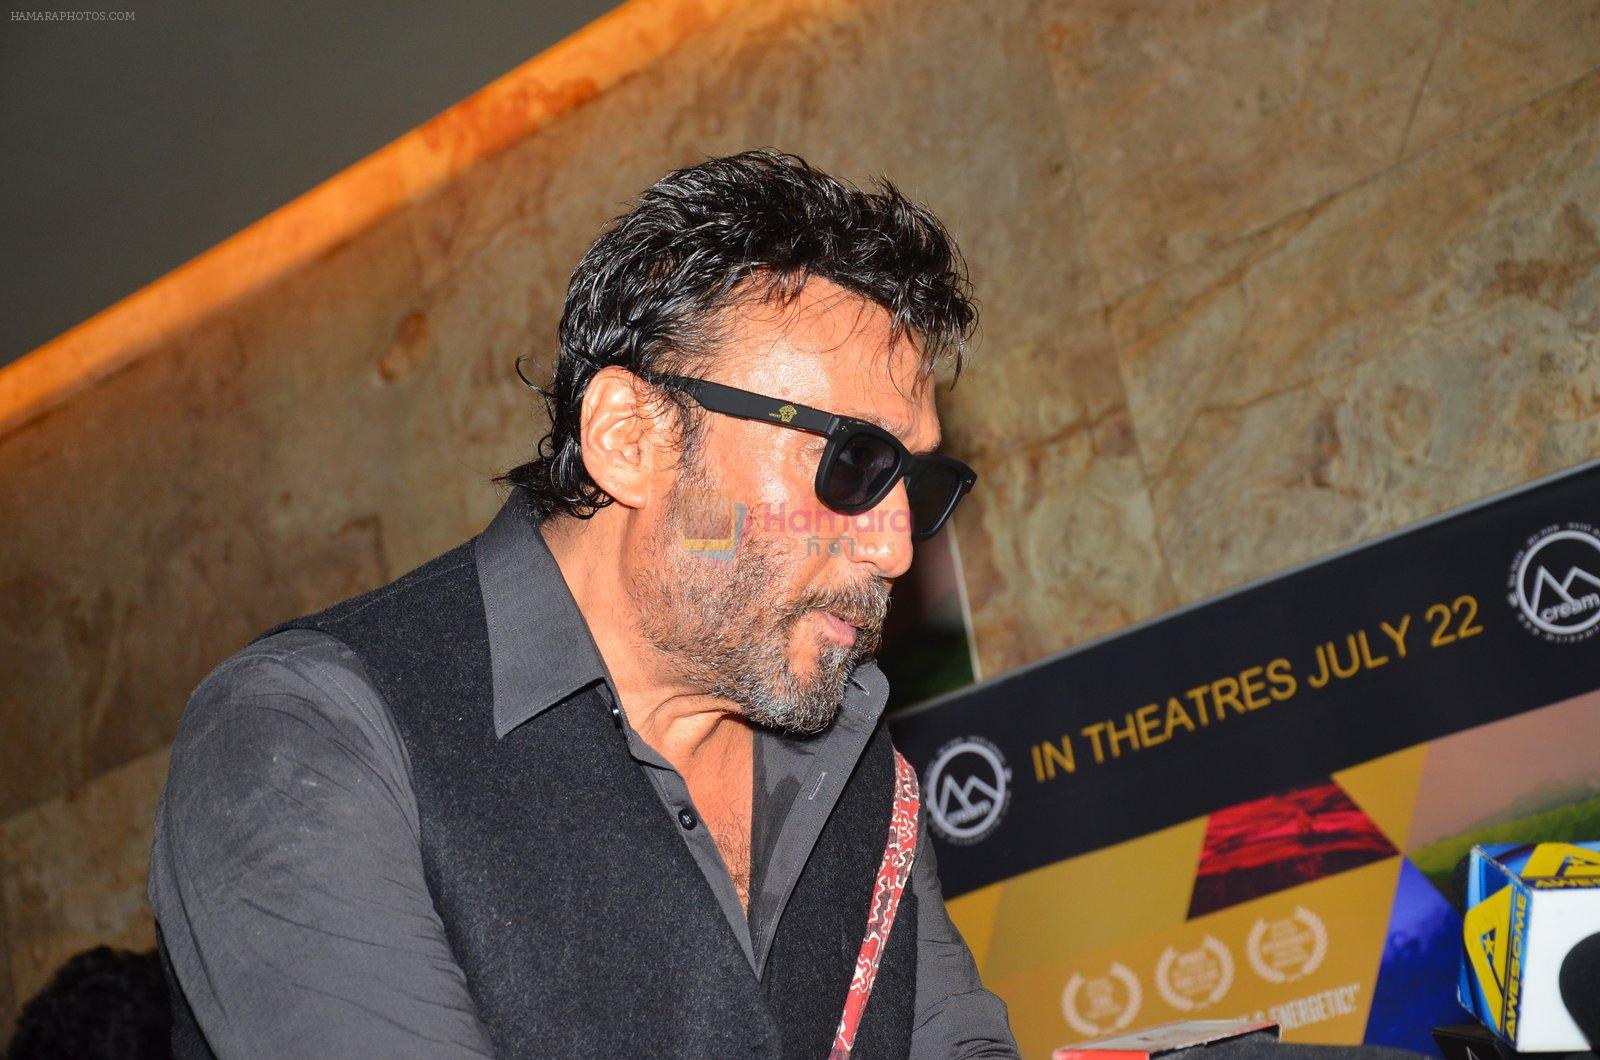 Jackie Shroff at Imaad and Ira Dubey's film MCream on 13th July 2016